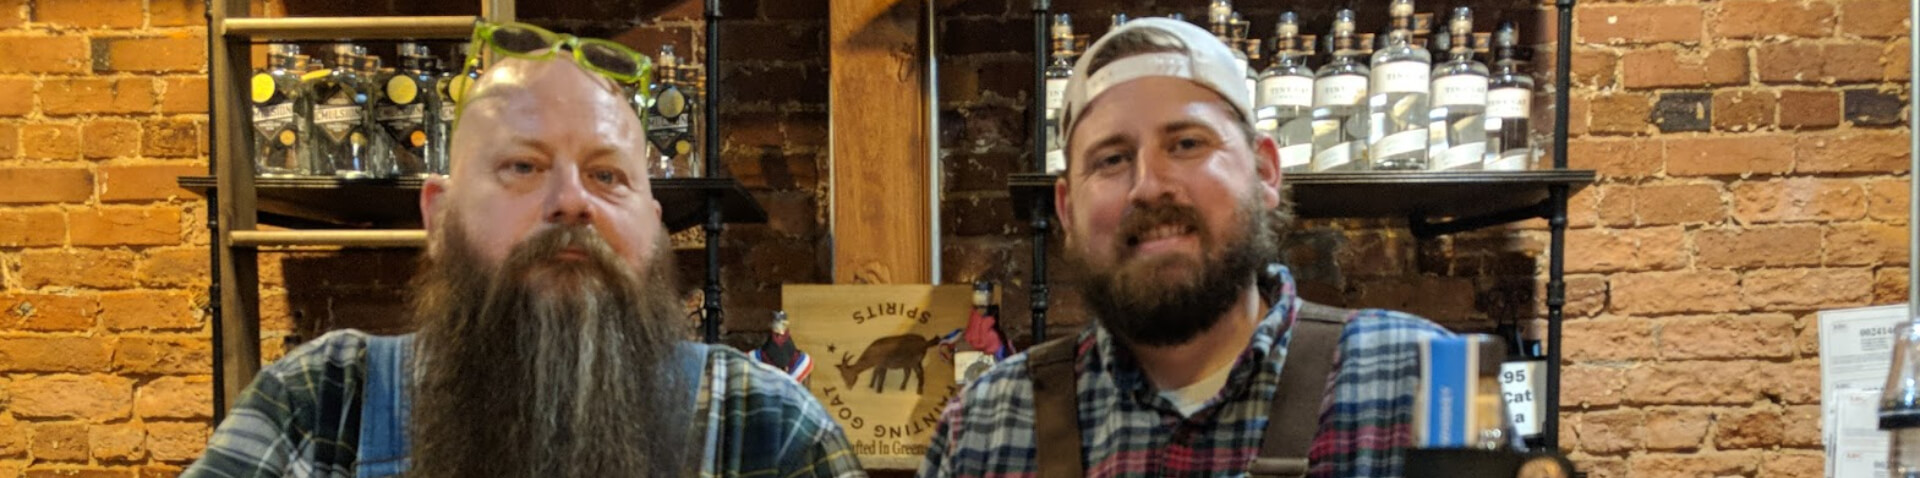 Two bearded men in plaid and overalls with a bottle of whiskey